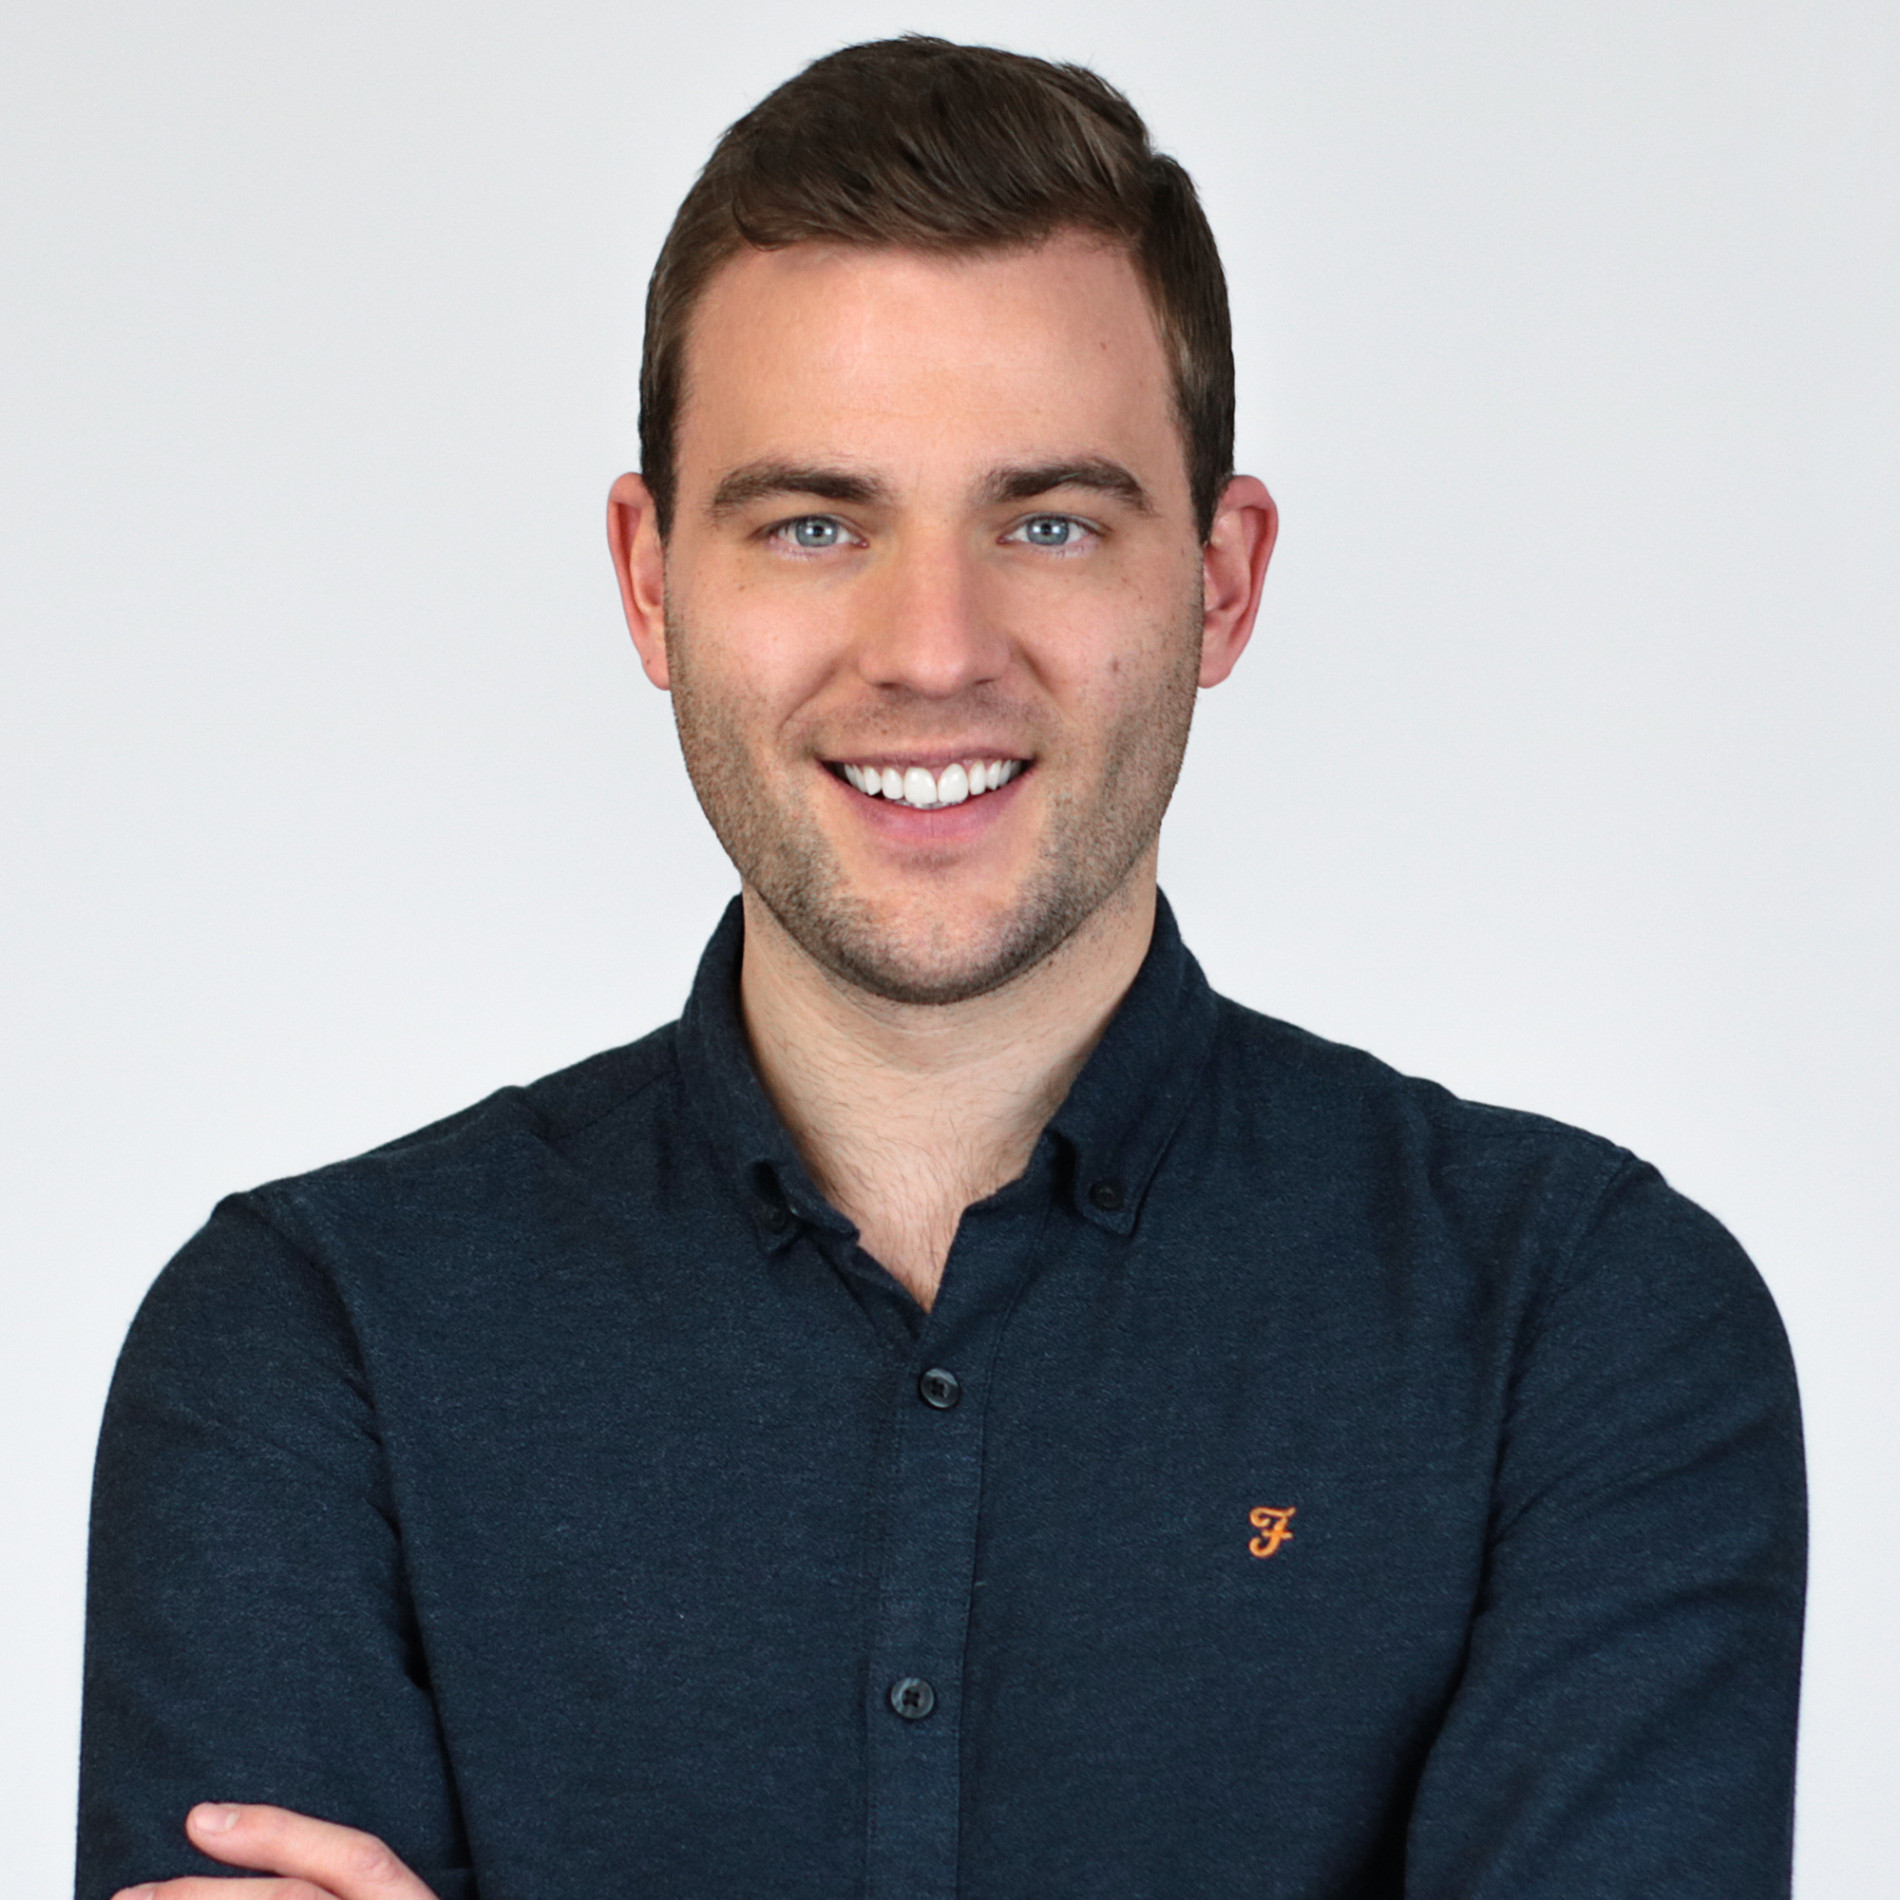 Andrew Carr, recruitment professional at Gleeson Recruitment Group